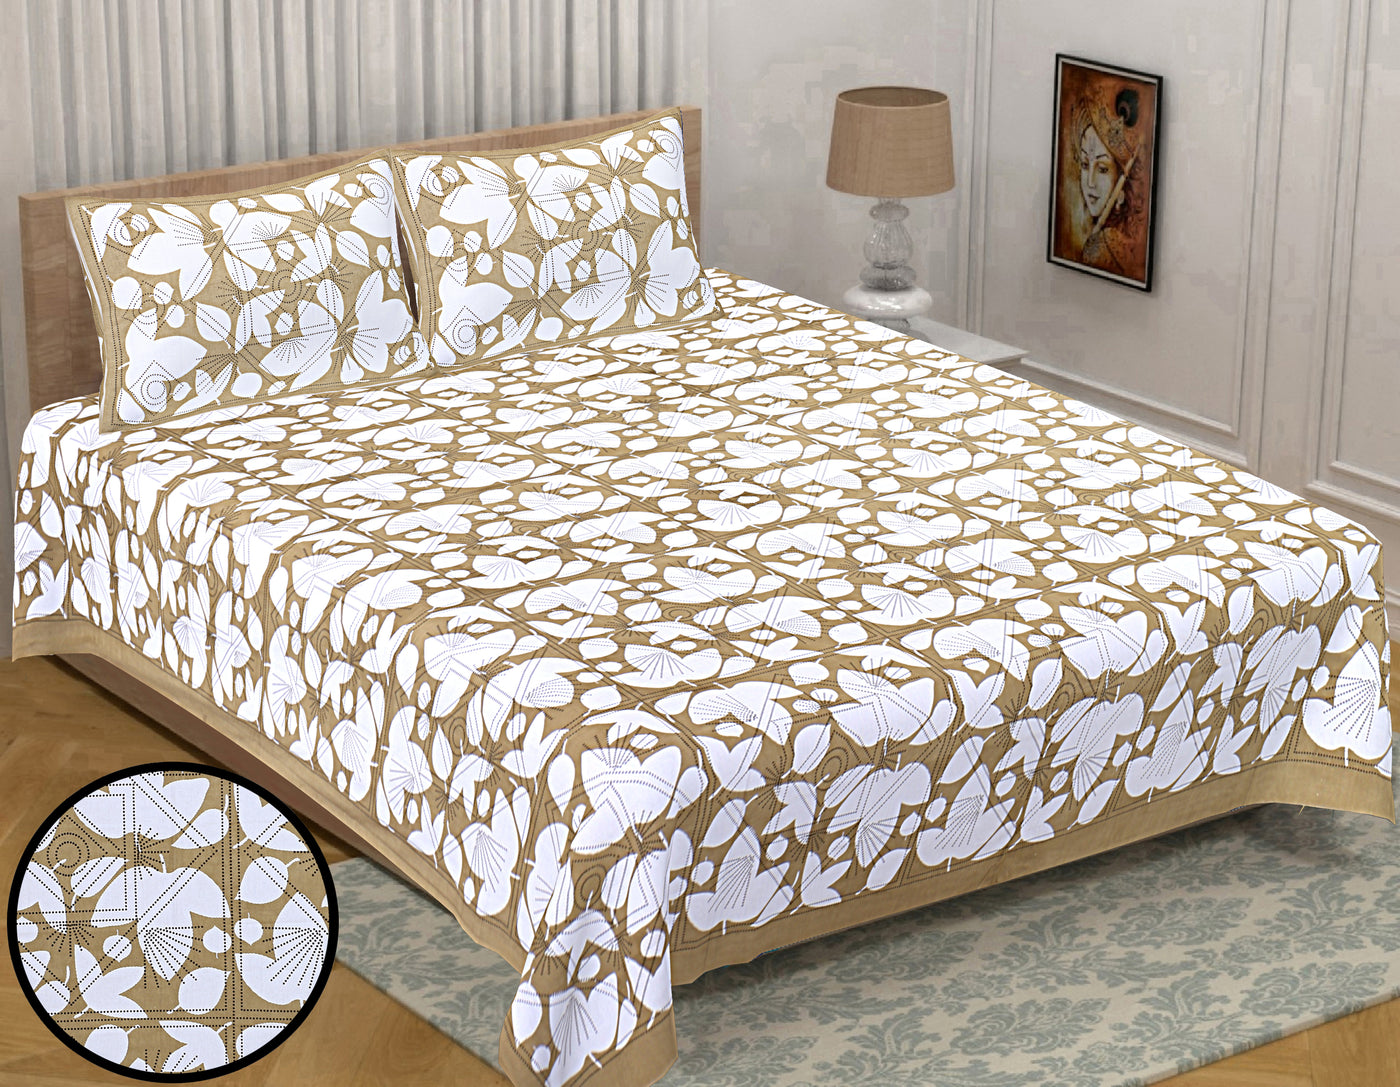 Wanderlust  Premium | King Size 90 x 108 in | 100% Pure Cotton | Double Bedsheet with 2 Pillow Covers (DLGT 04)